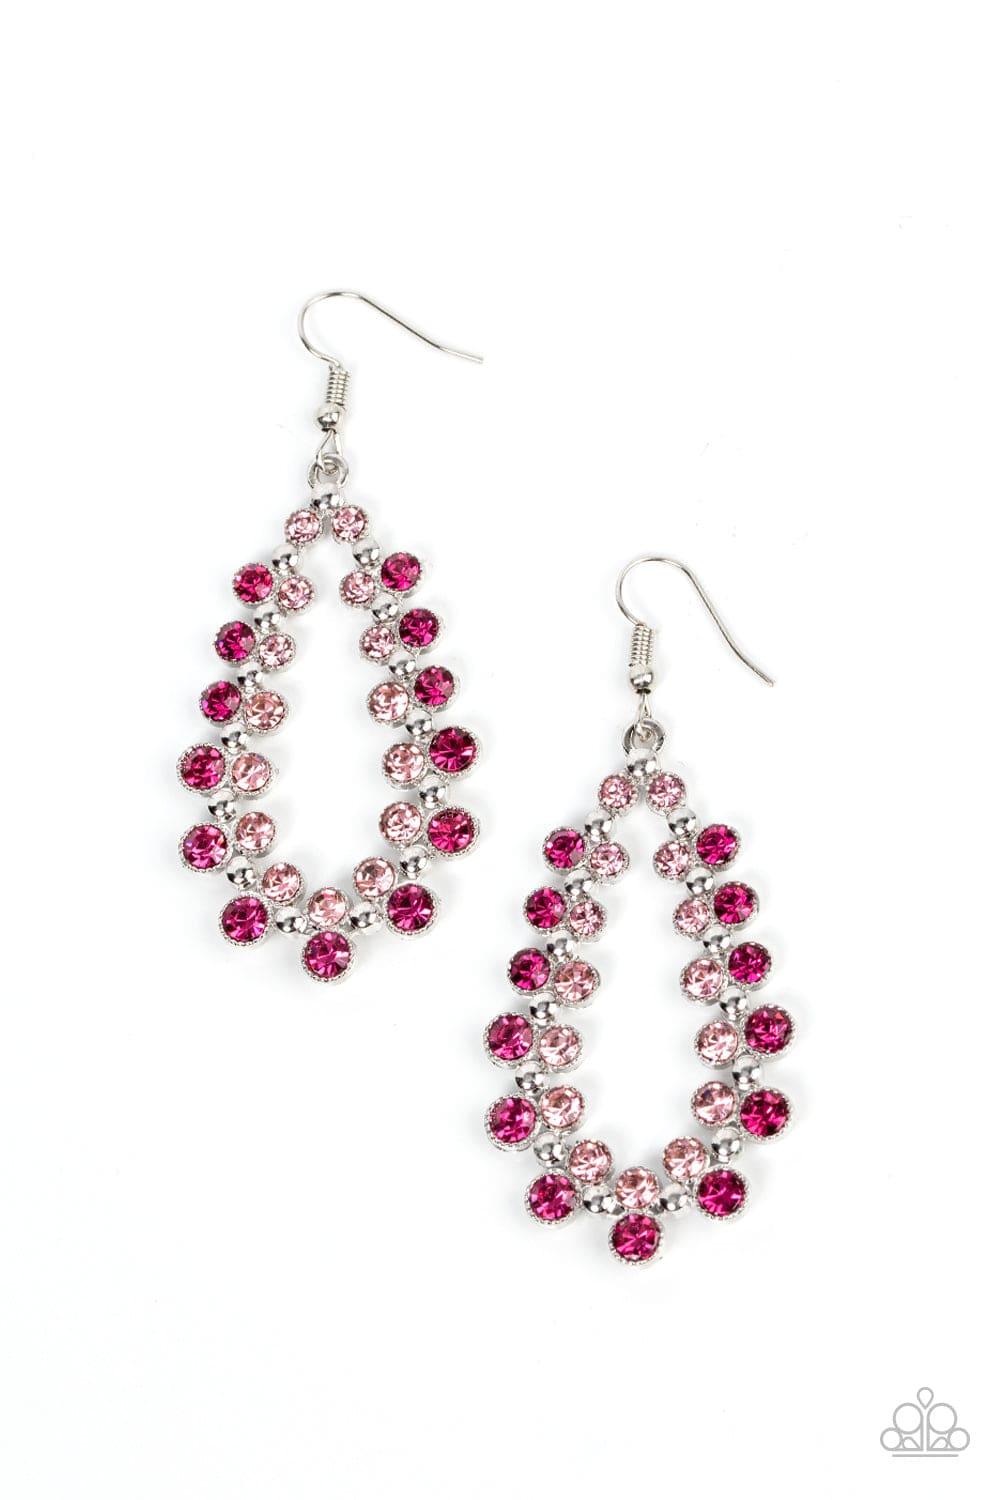 Paparazzi Accessories - Its About To Glow Down - Pink Earrings - Bling by JessieK